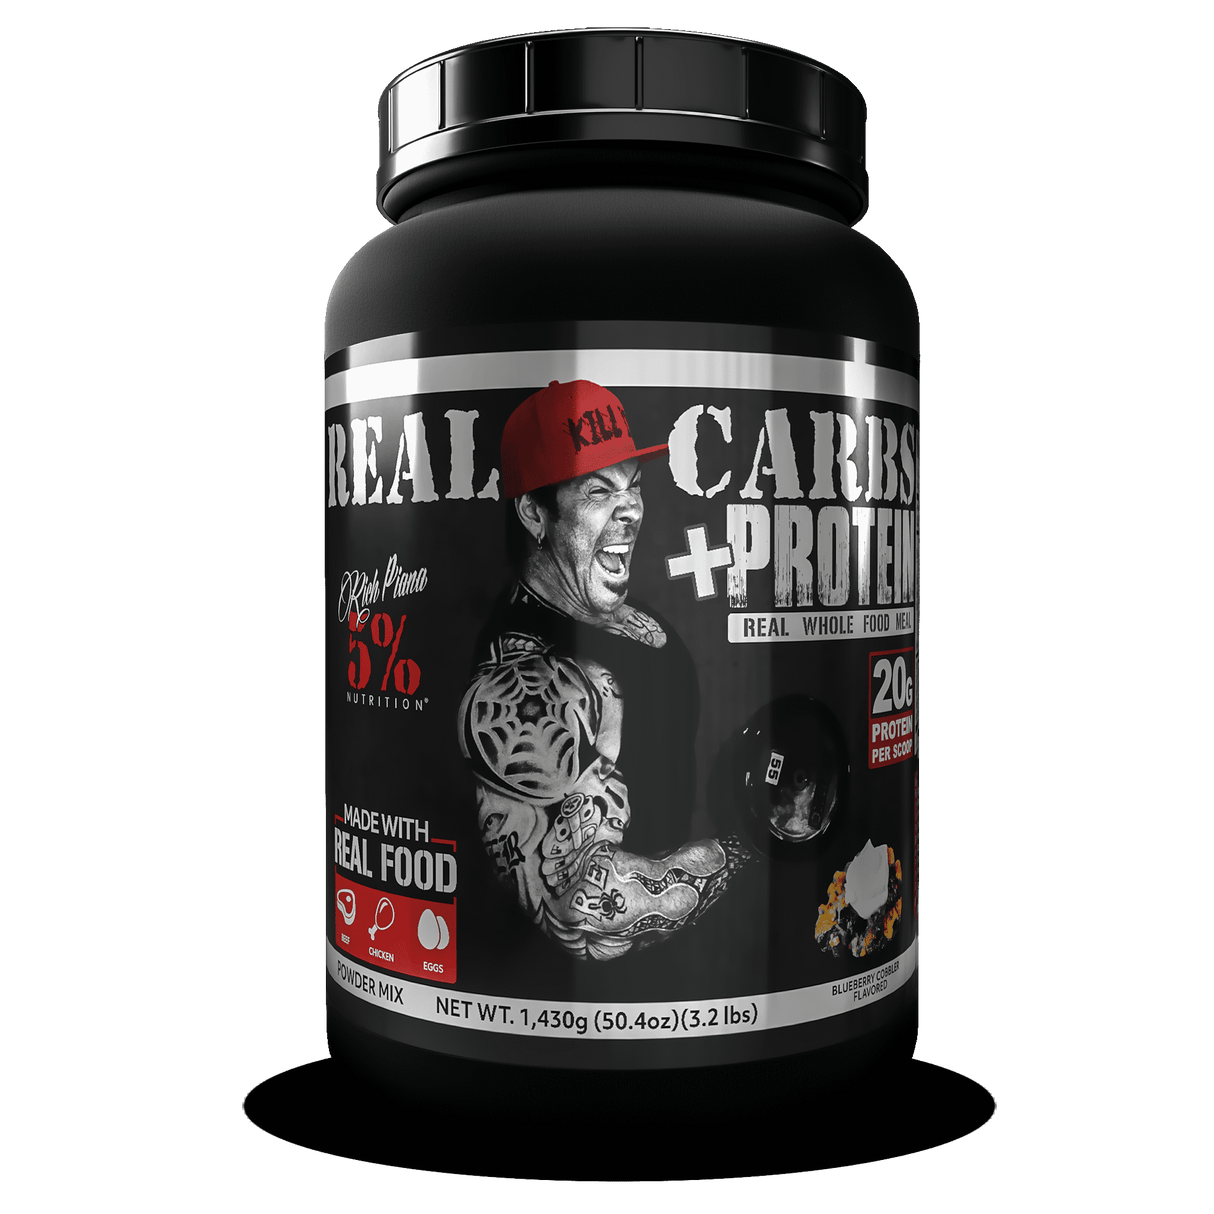 REAL CARBS + PROTEIN - Muscle Factory, LLC